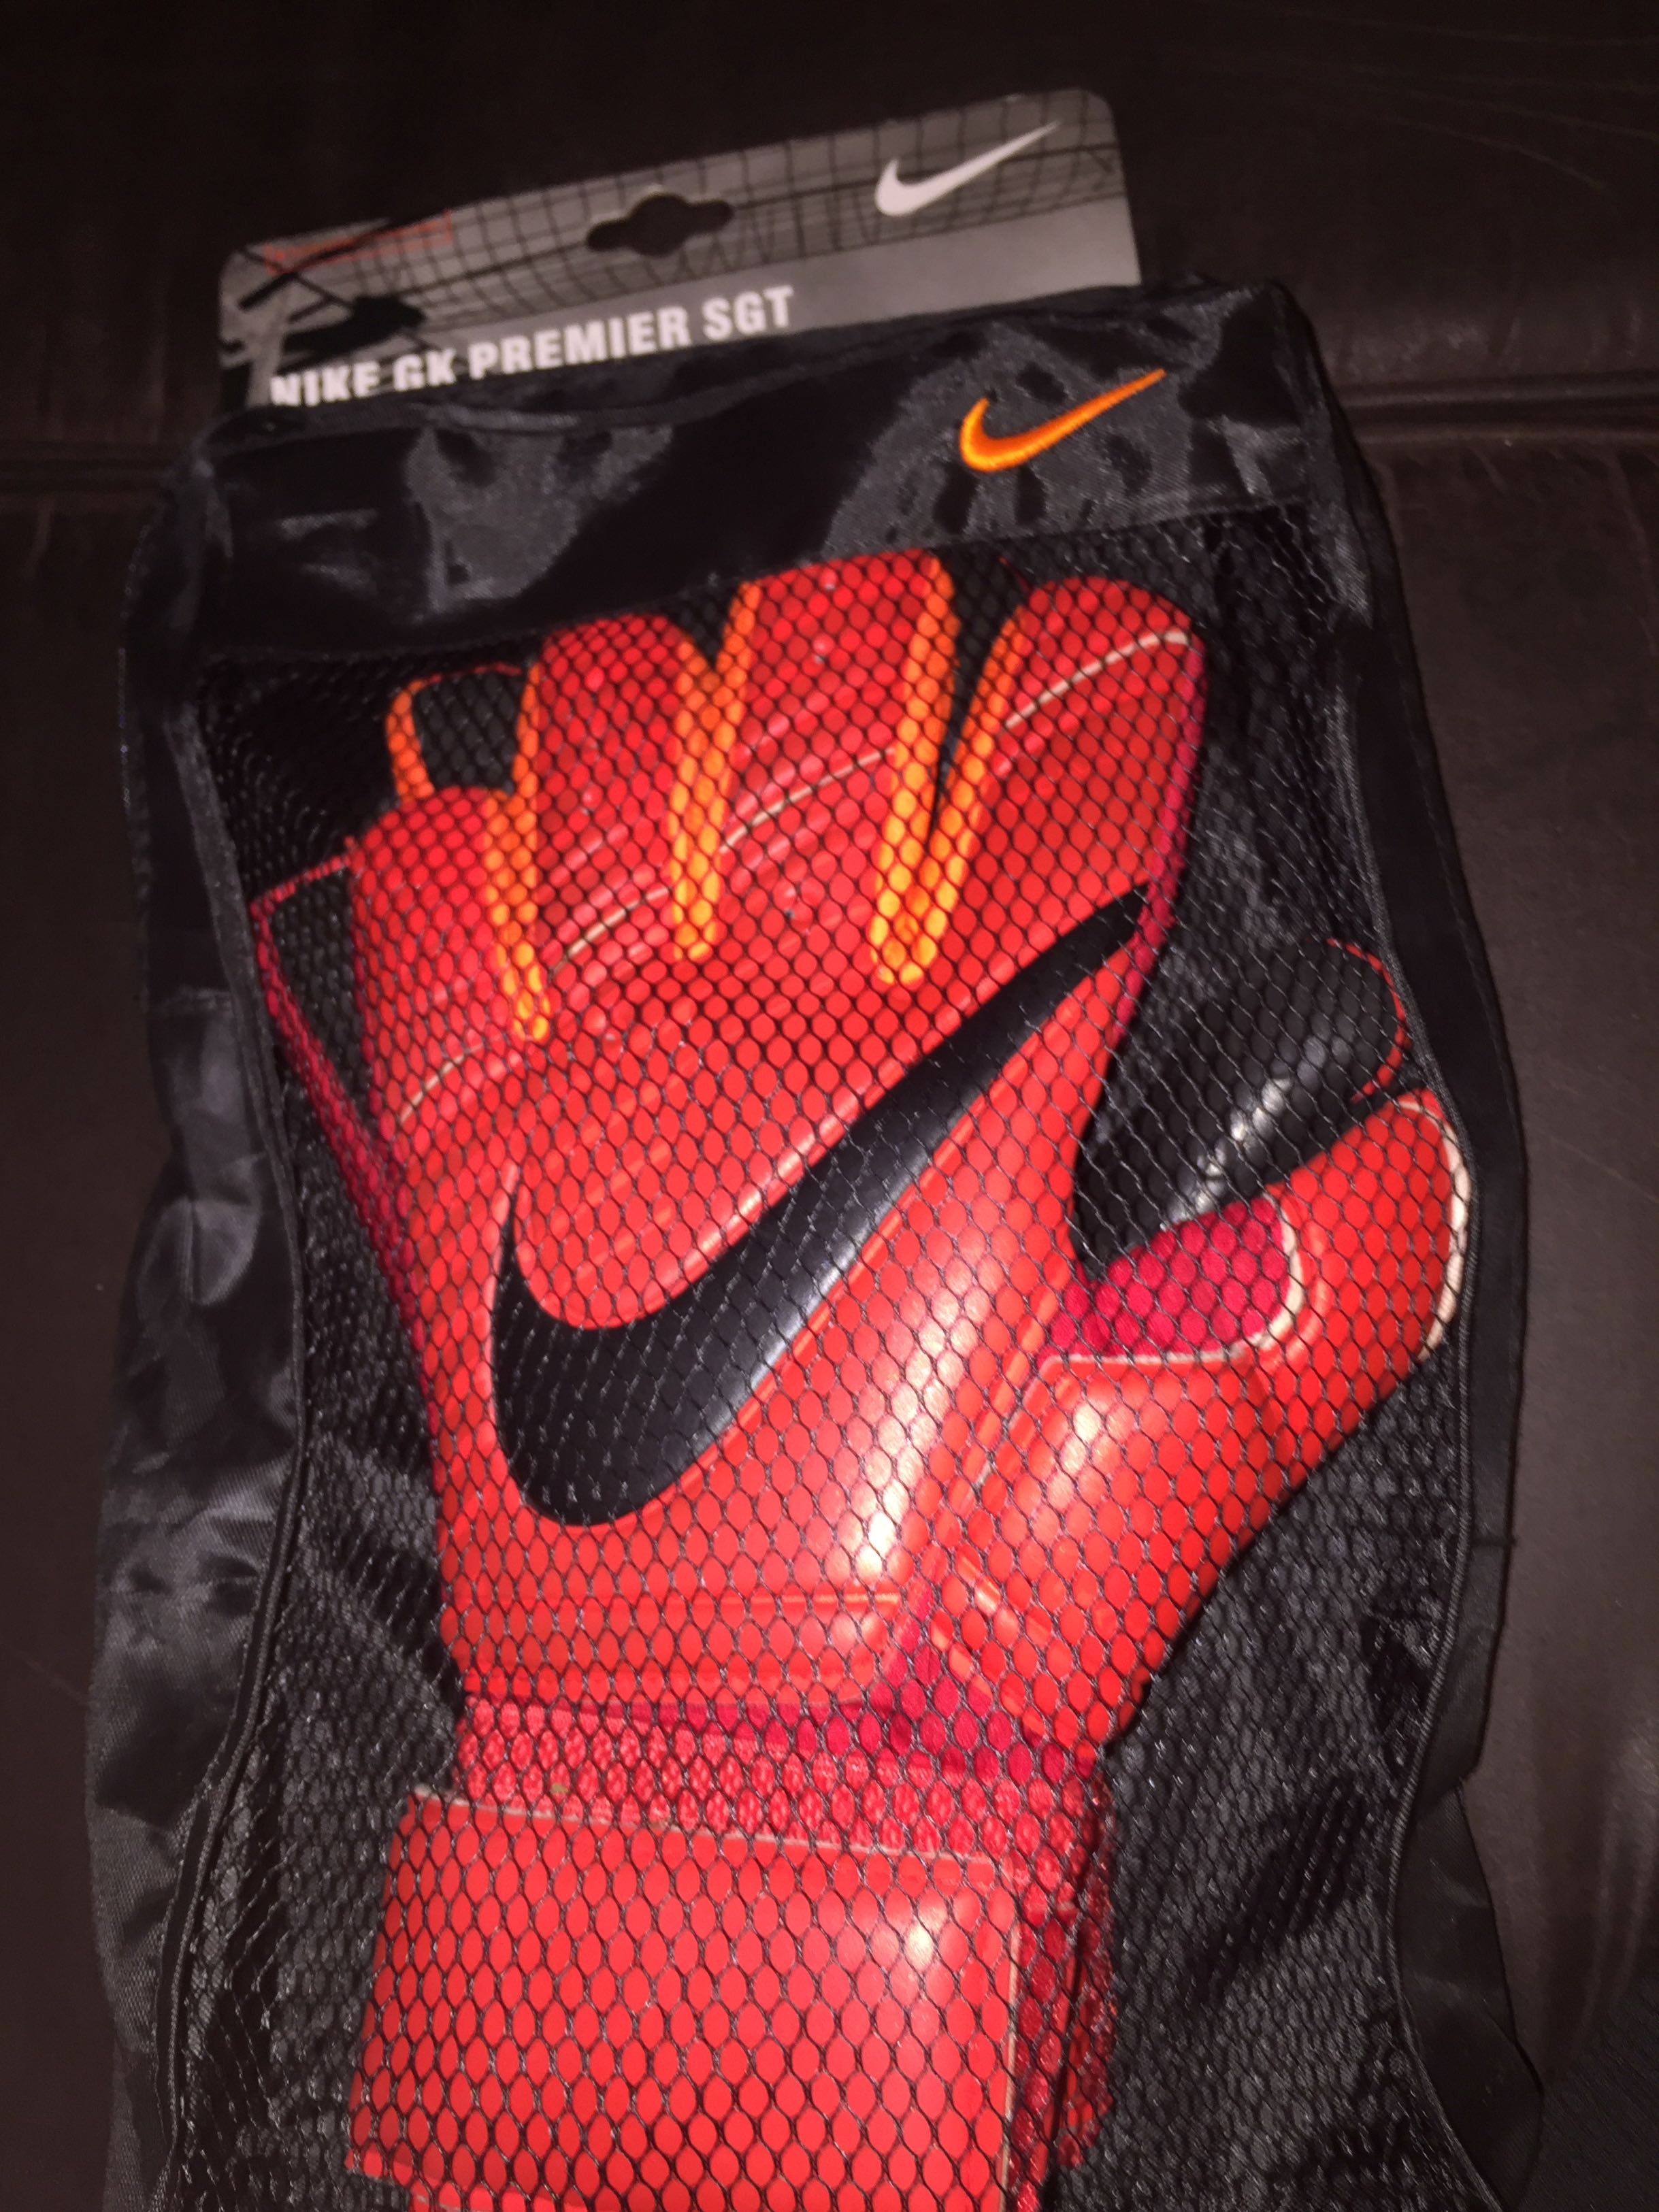 Nike premier rs promo goalkeeper gloves, Sports Equipment, Sports & Games, Water Sports on Carousell